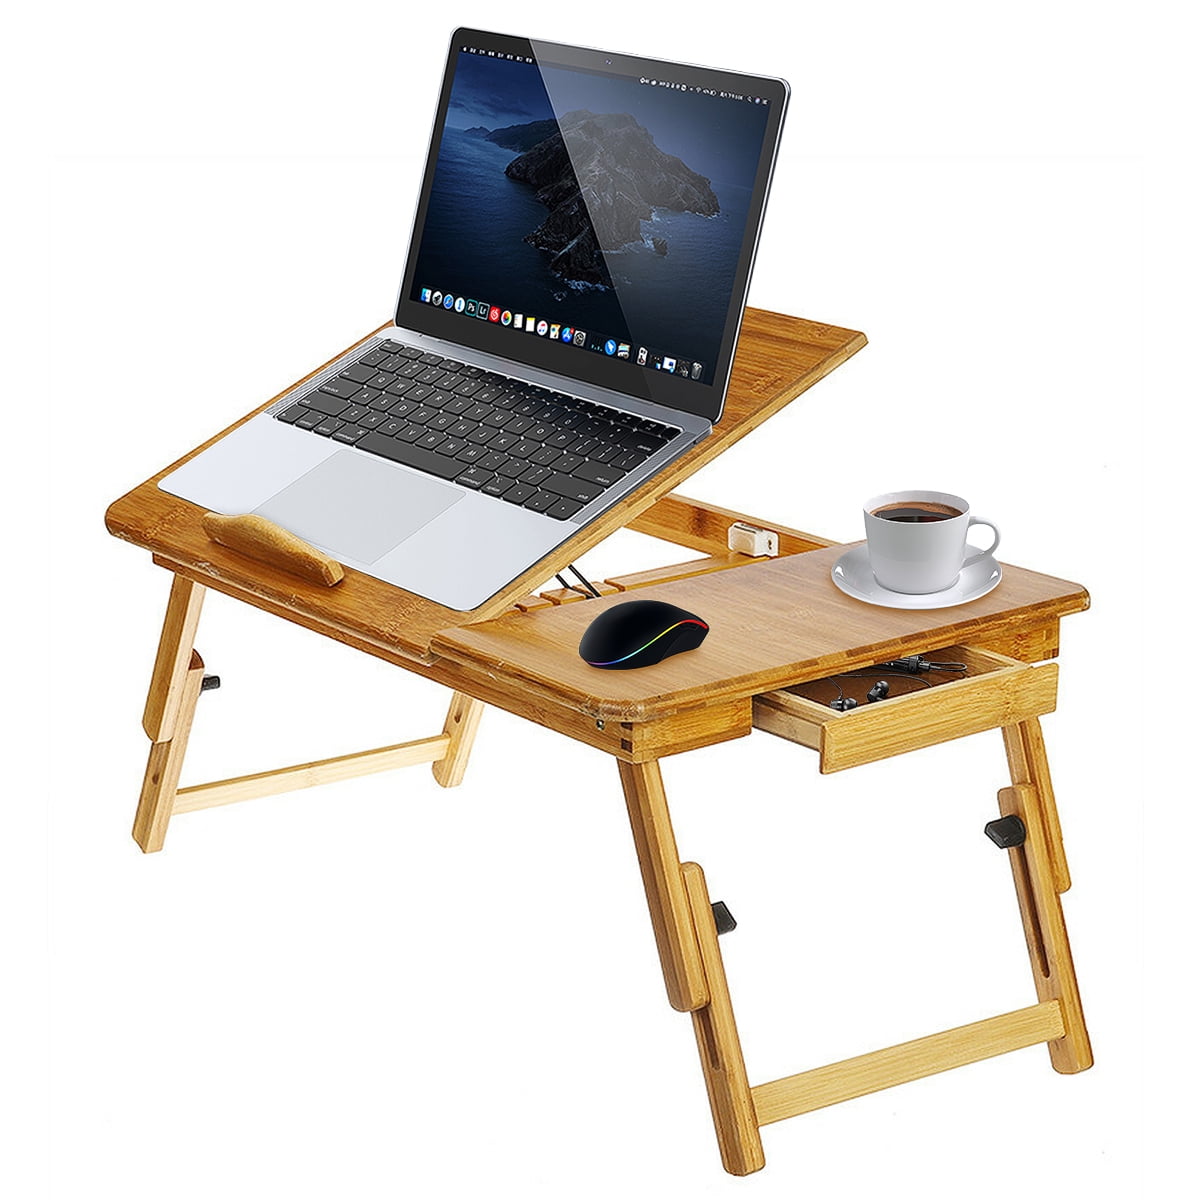 Adjustable Folding Lap Desk Bamboo Laptop Breakfast Tray Natural Bed Table Stand 